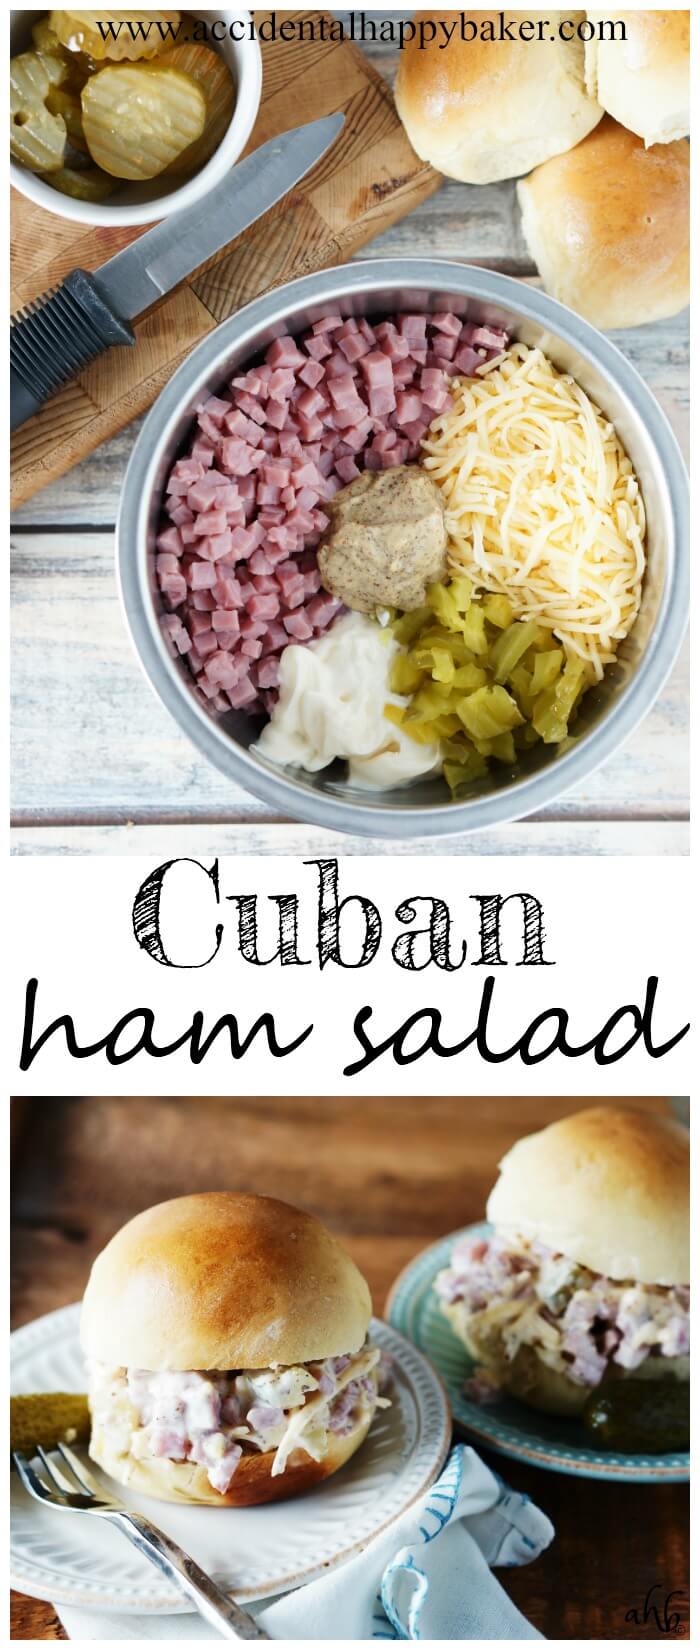 Pep up your sandwiches with this easy Cuban ham salad. This zippy sandwich spread has the flavor of Cuban sandwiches and it perfect for parties and picnics.